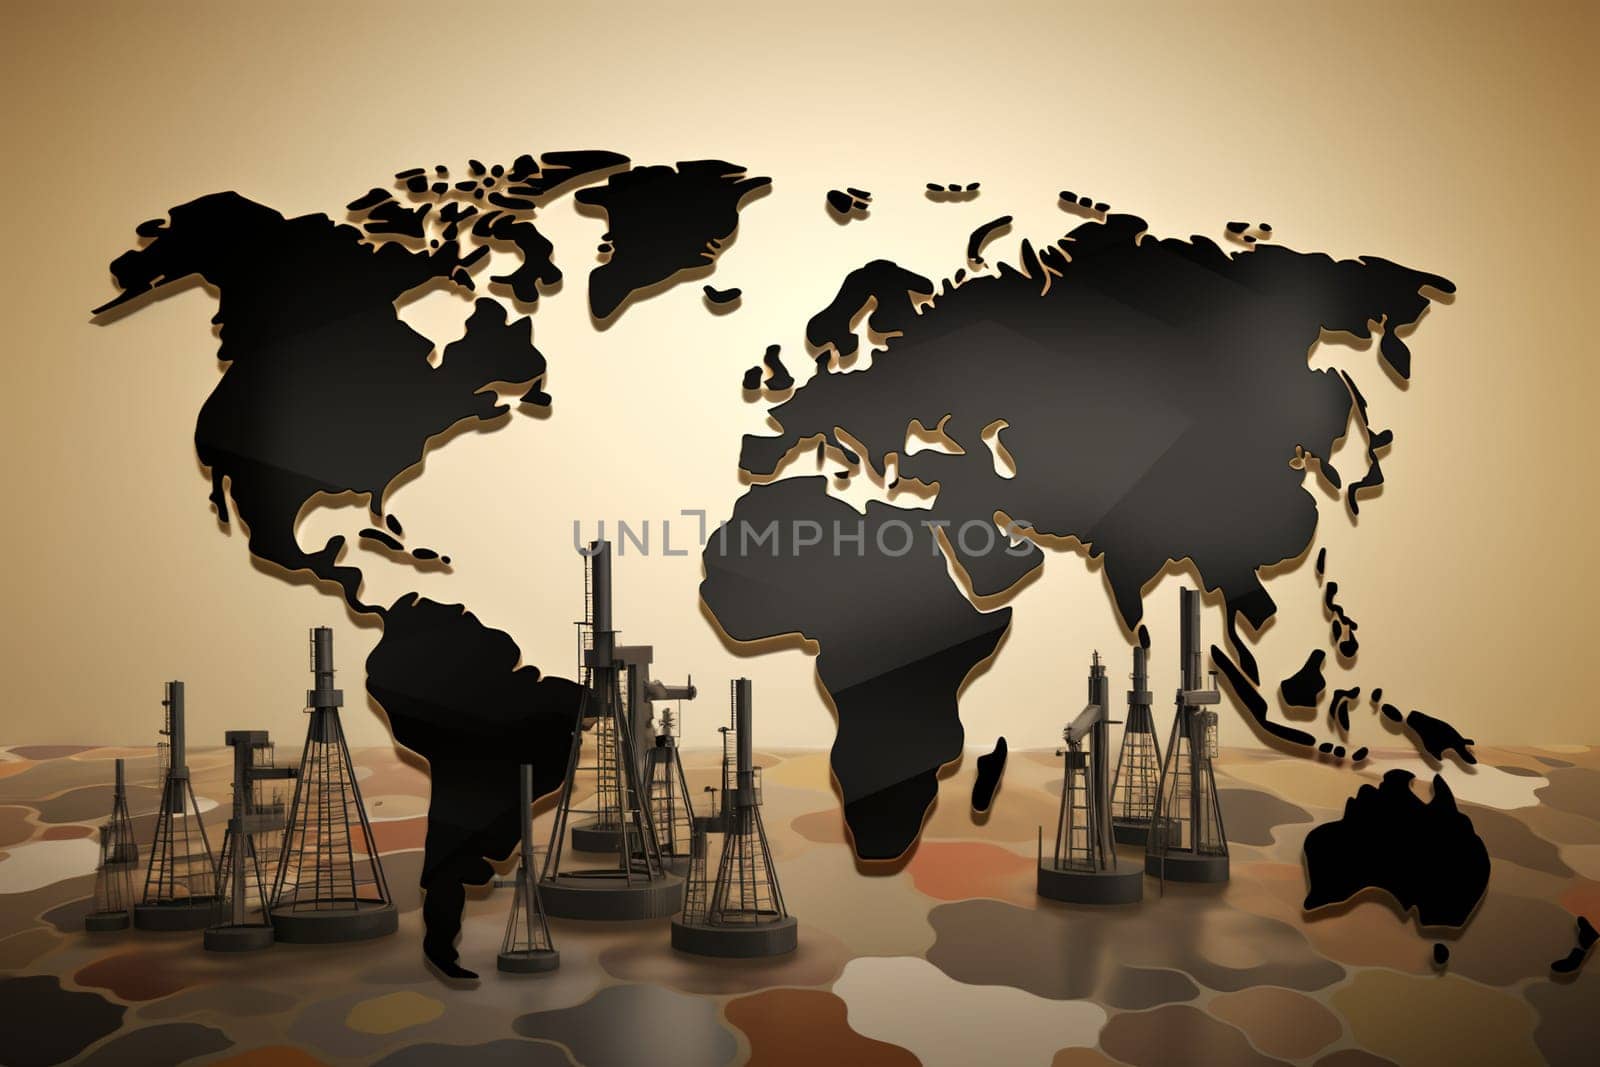 Map All The World With Oil Production Rigs by GekaSkr